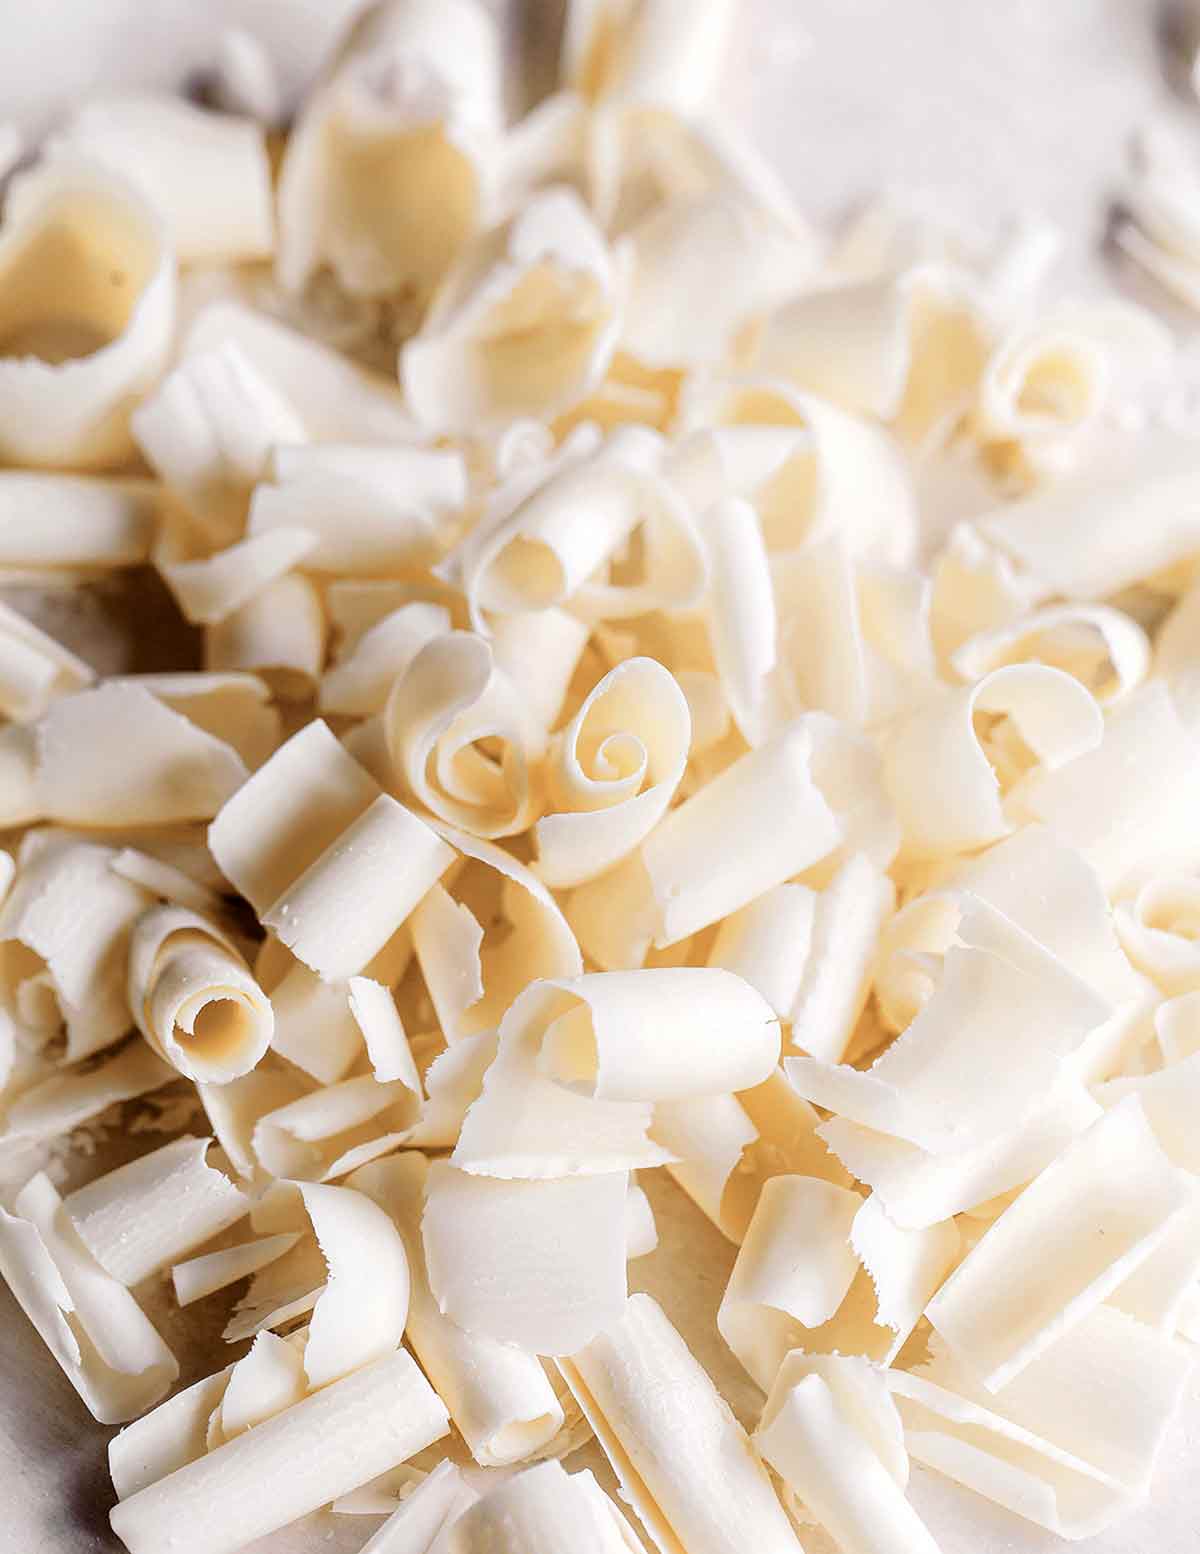 A pile of white chocolate curls